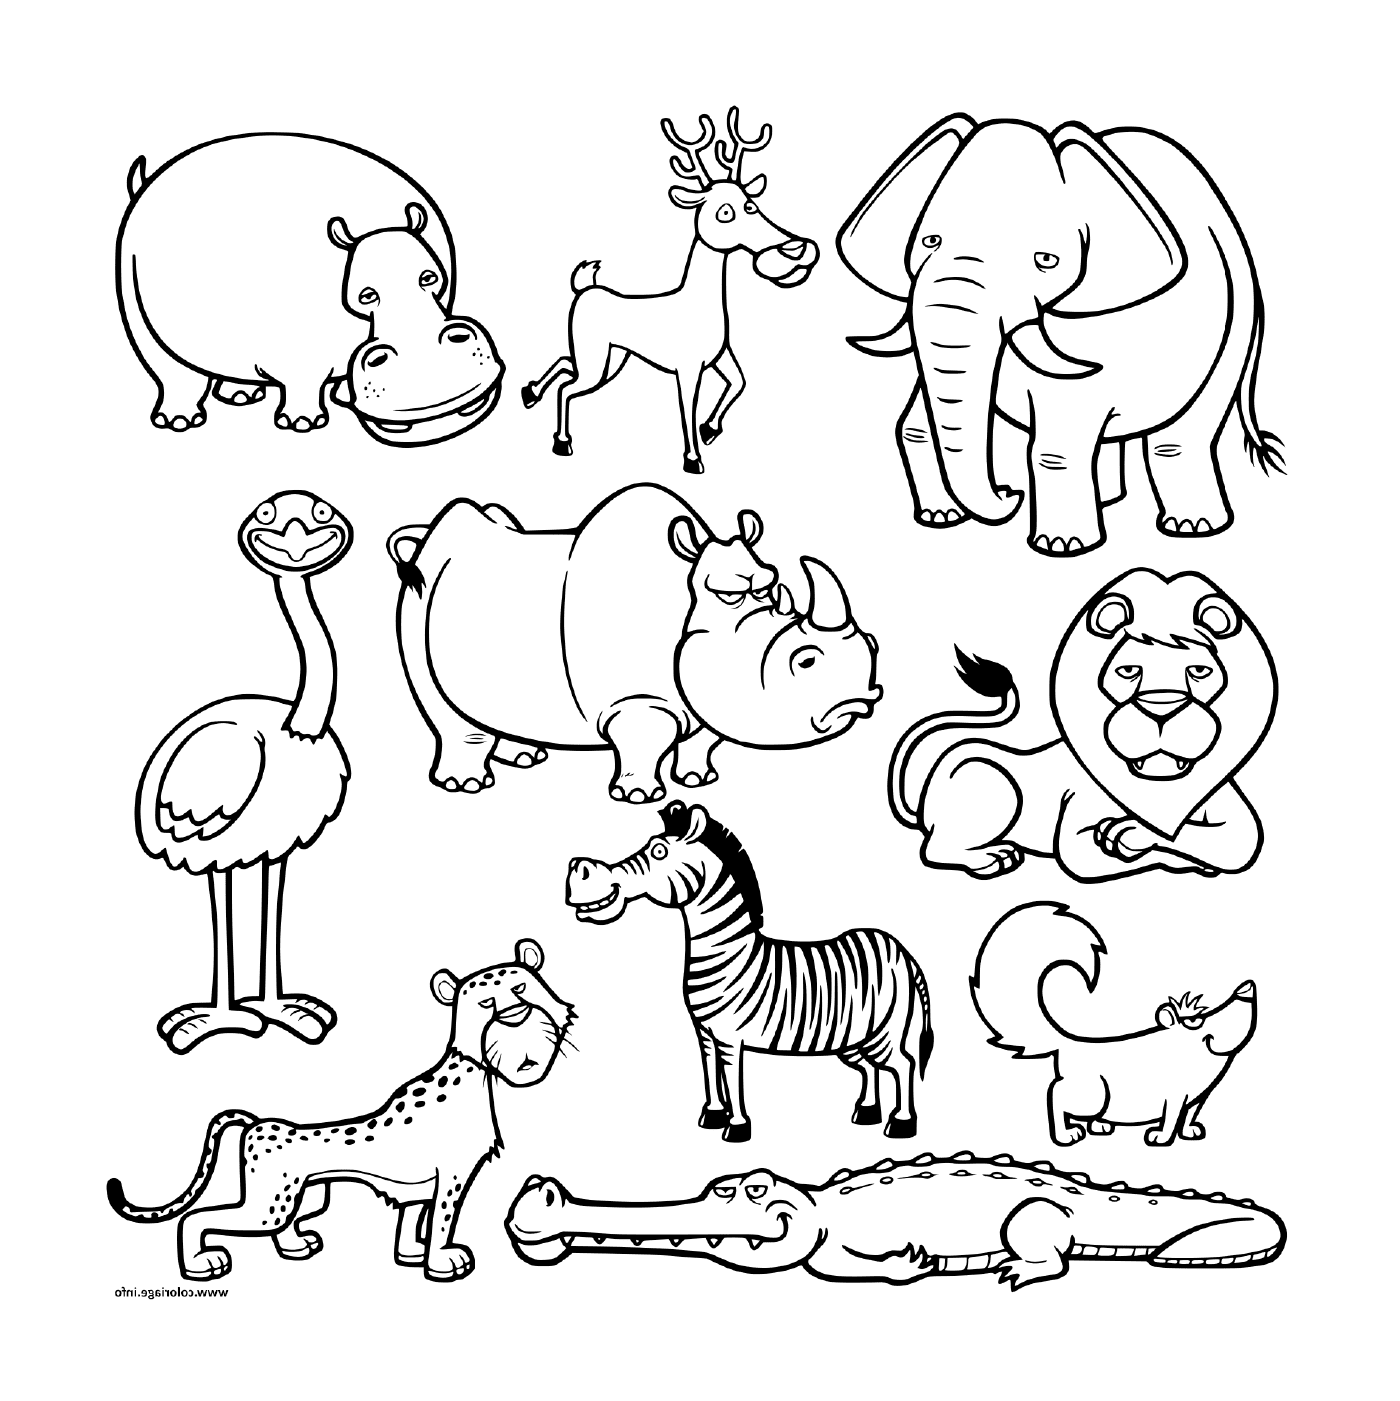  A group of animals in groups 